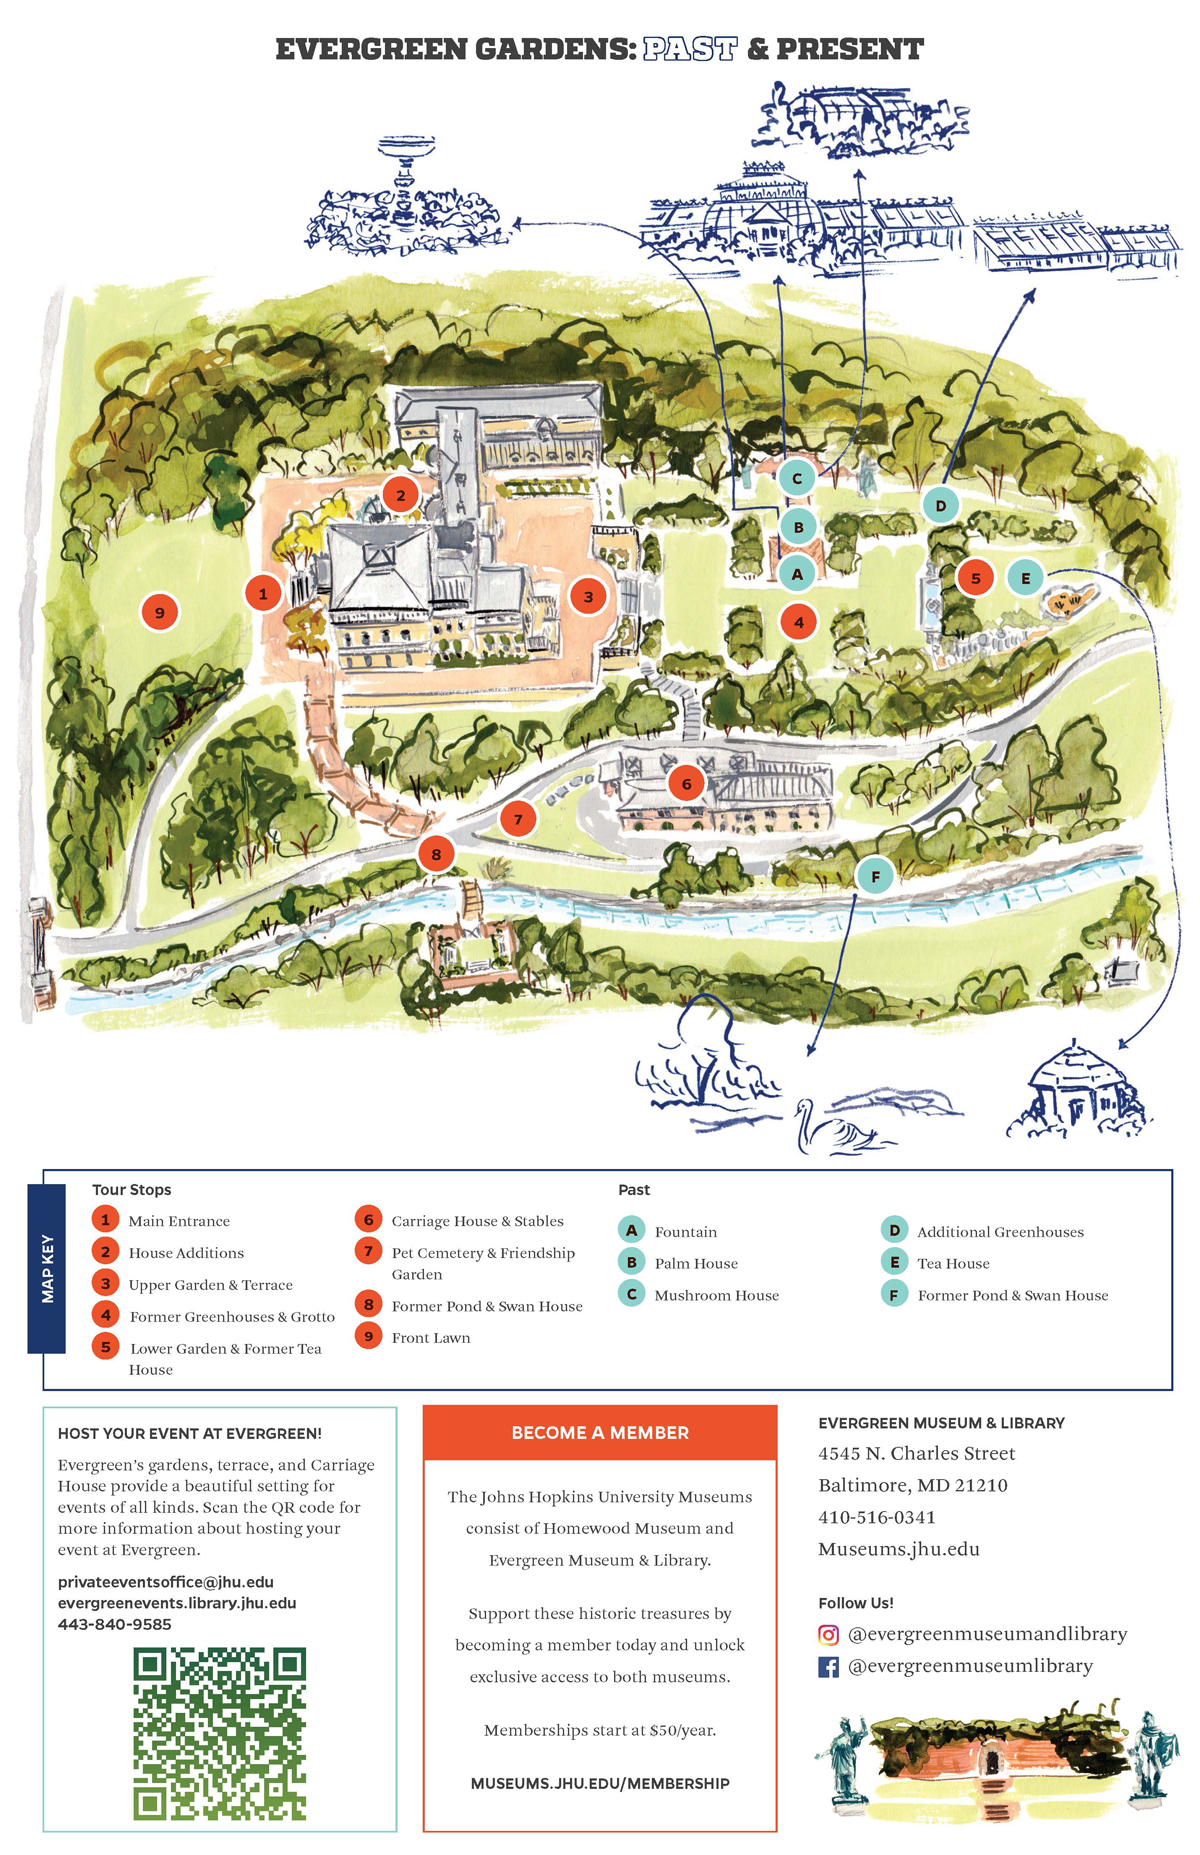 jolly edition illustrated map for Evergreen Museum & Library historical gardens owned by Johns Hopkins University